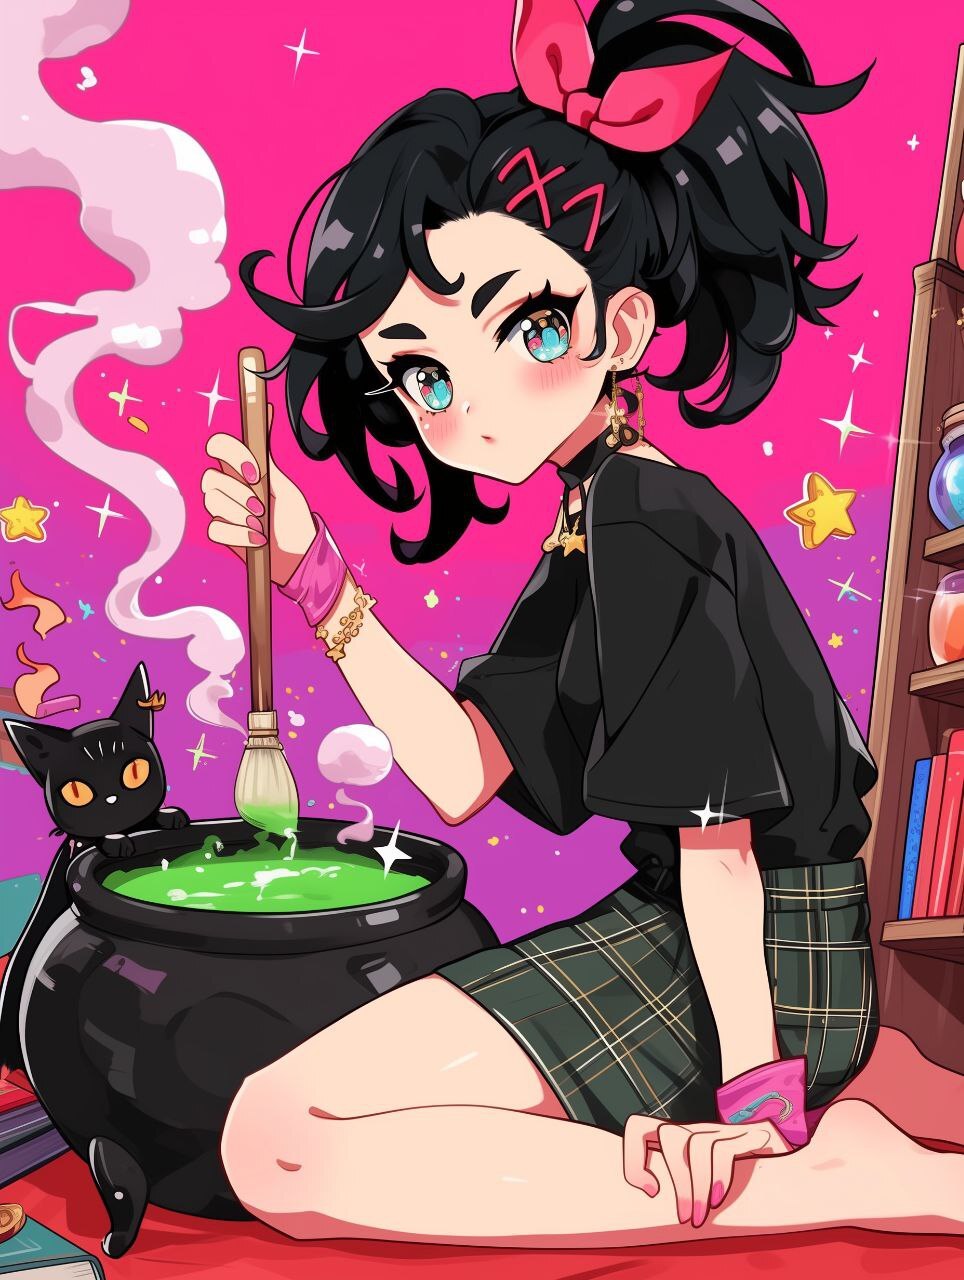 Witches and their furry helpers - My, Girls, Anime, Anime art, Art, Witches, Barefoot, Boiler, Potions, Neural network art, Original character, cat, Square, V, Digital drawing, Milota, Phone wallpaper, Potions, Longpost